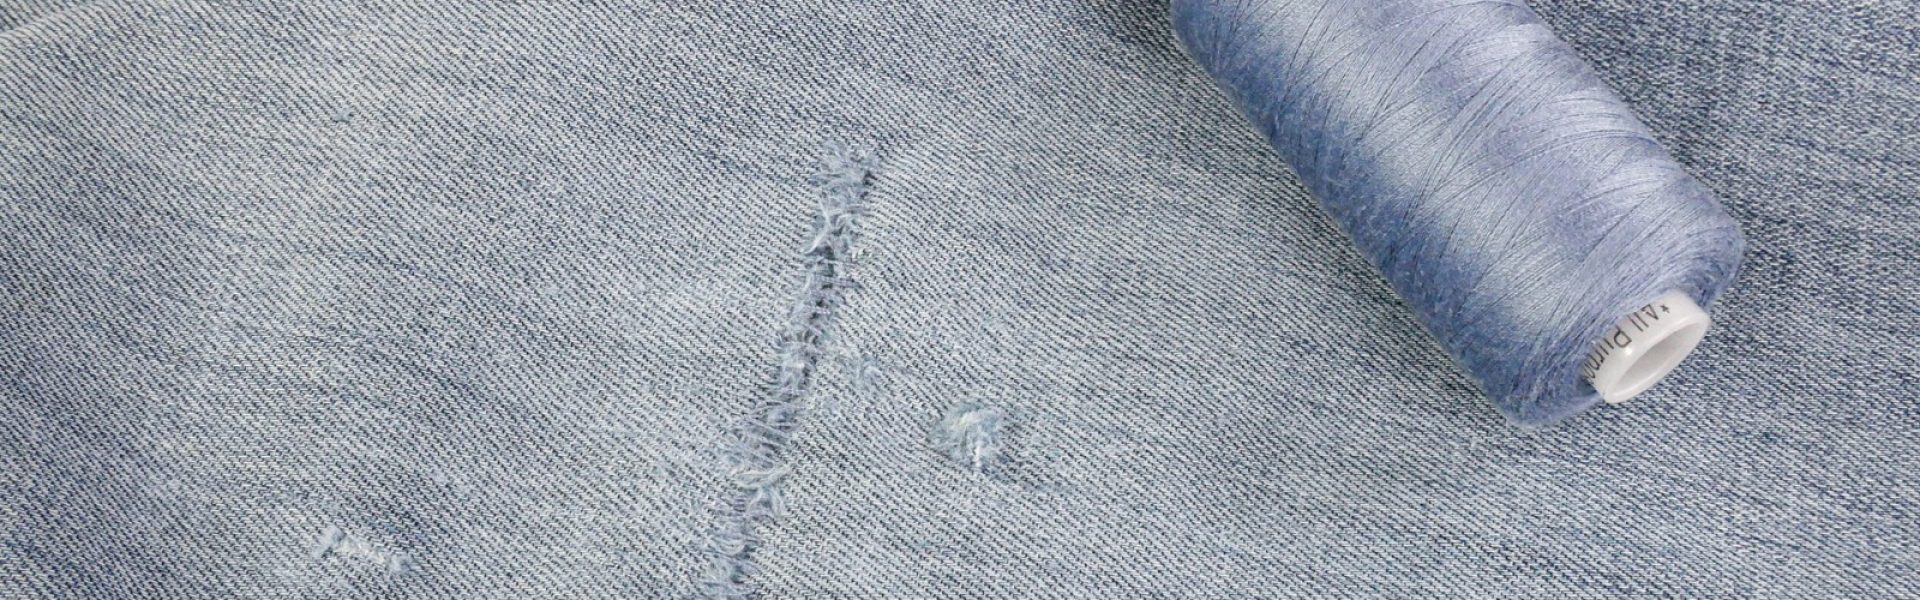 A photo of a torn pair of jeans repaired with hand sewing.